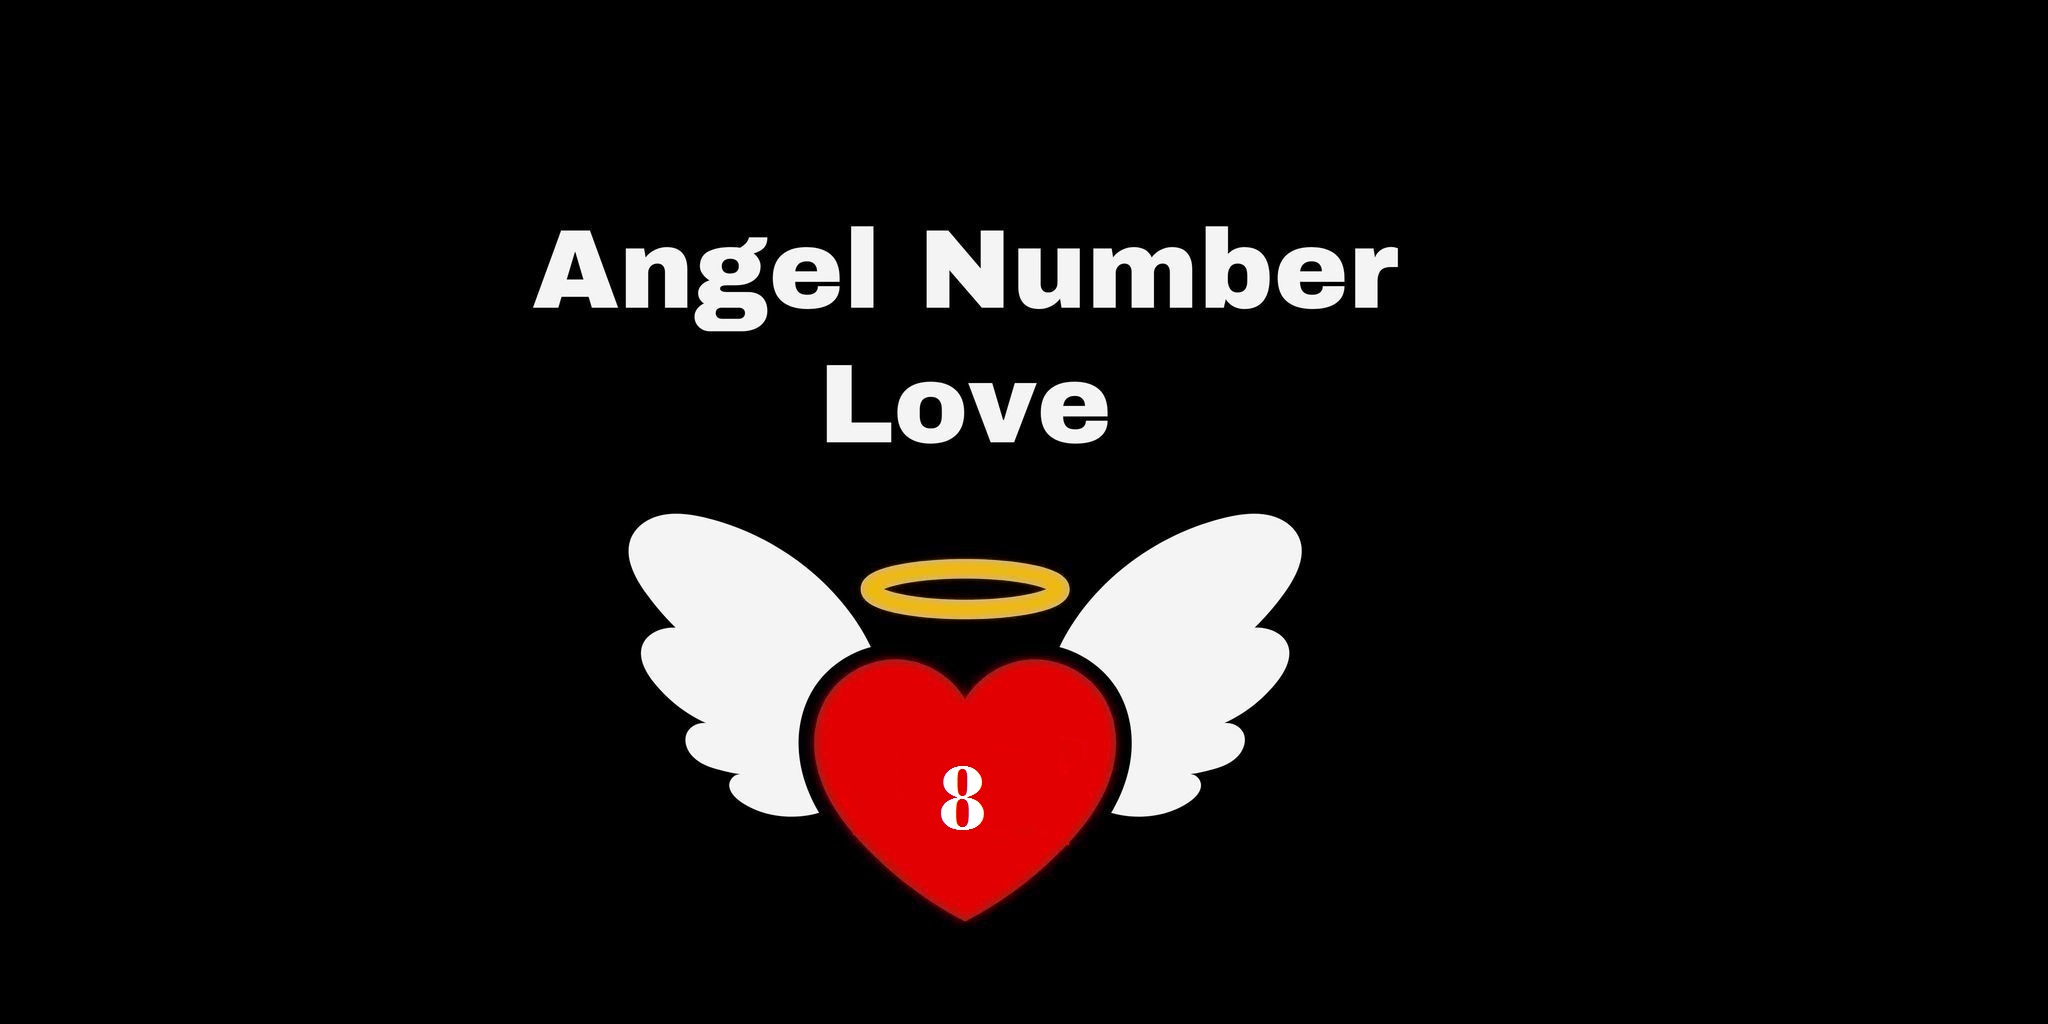 8 Angel Number Meaning In Love